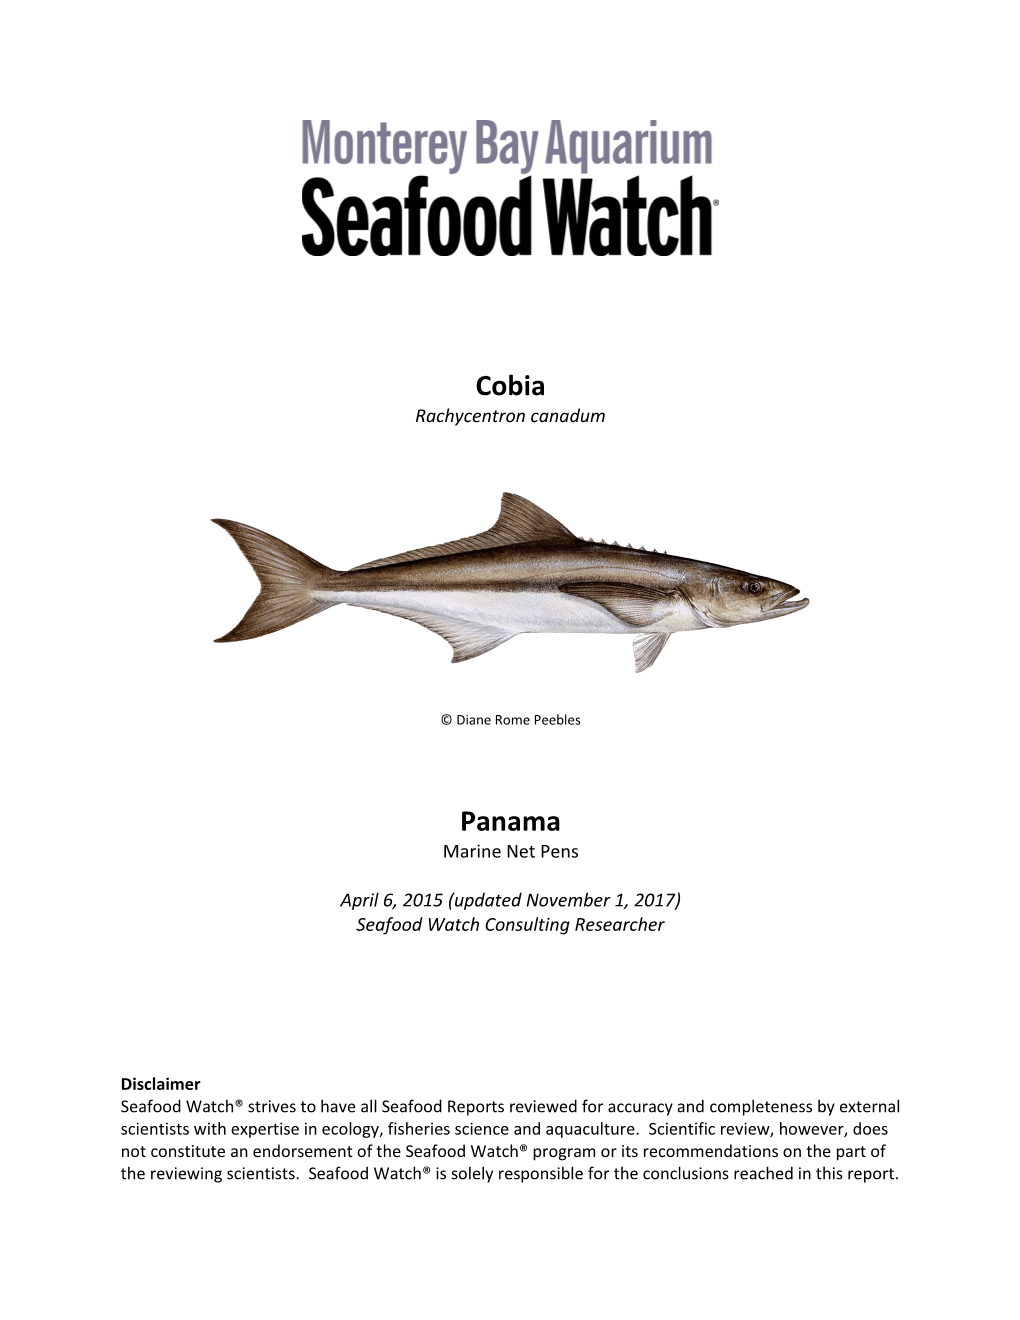 Seafood Watch Consulting Researcher